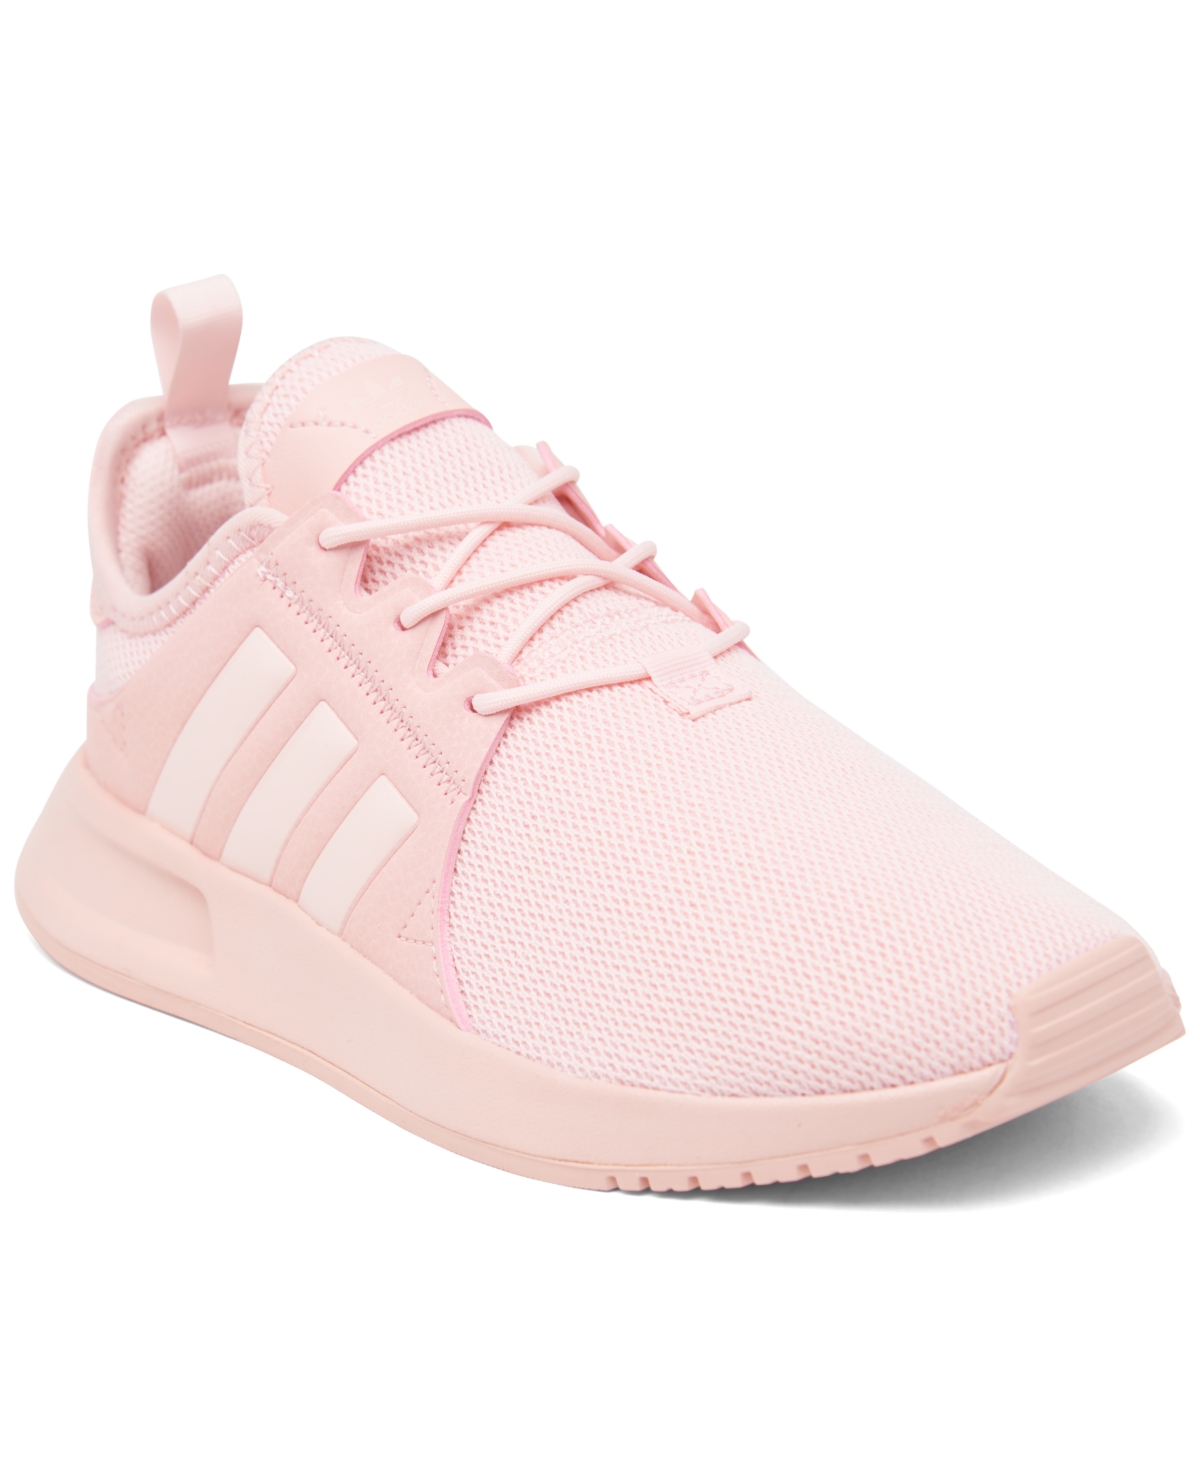 adidas Big Girls' X-plr Casual Athletic Sneakers from Finish Line